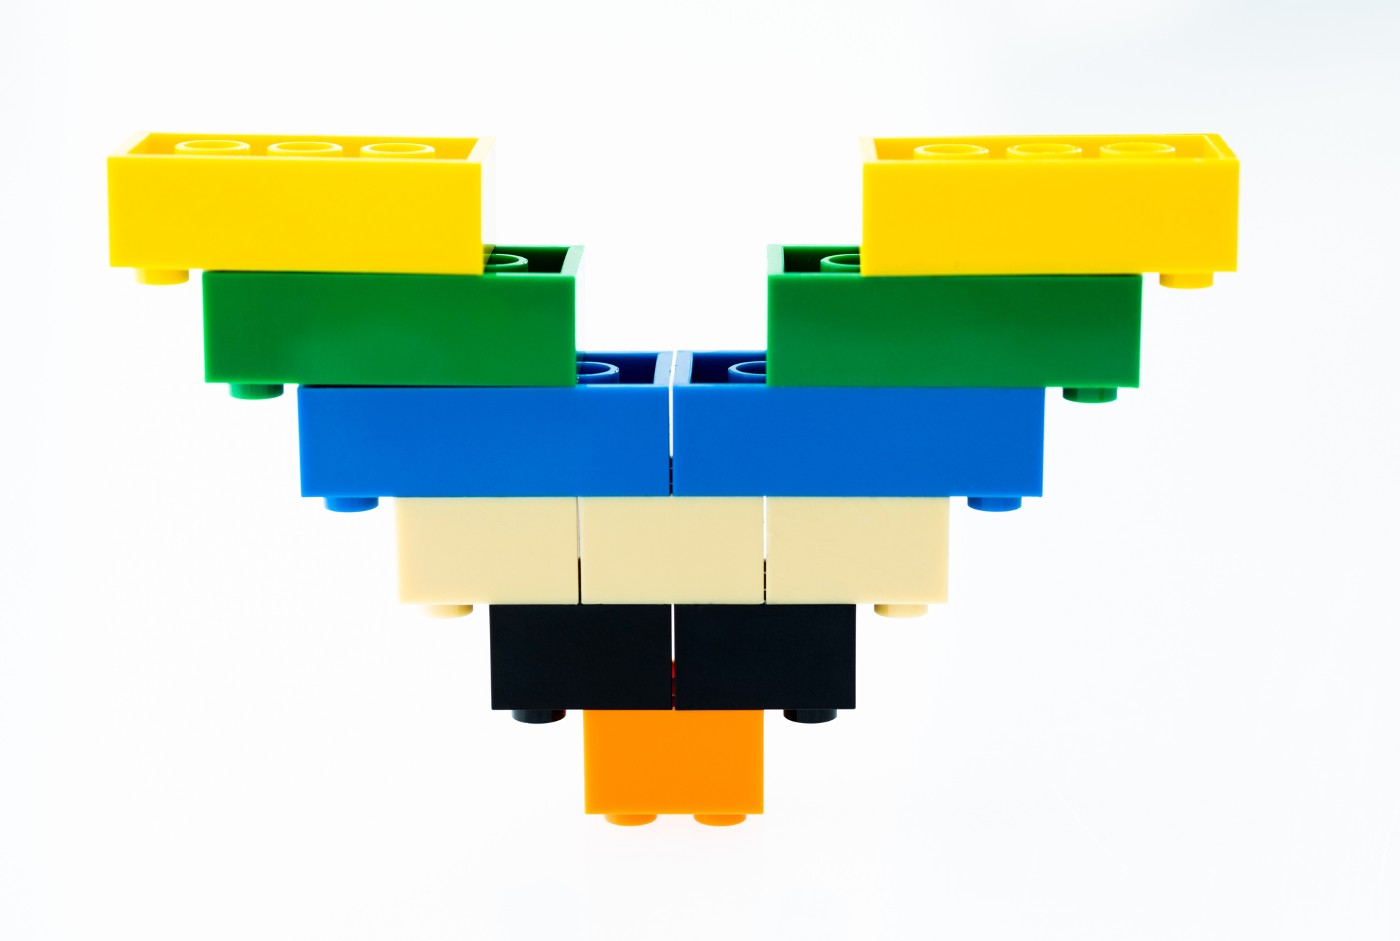 https://tickertapecdn.tdameritrade.com/assets/images/pages/md/Lego pyramid: Options straddles and strangles